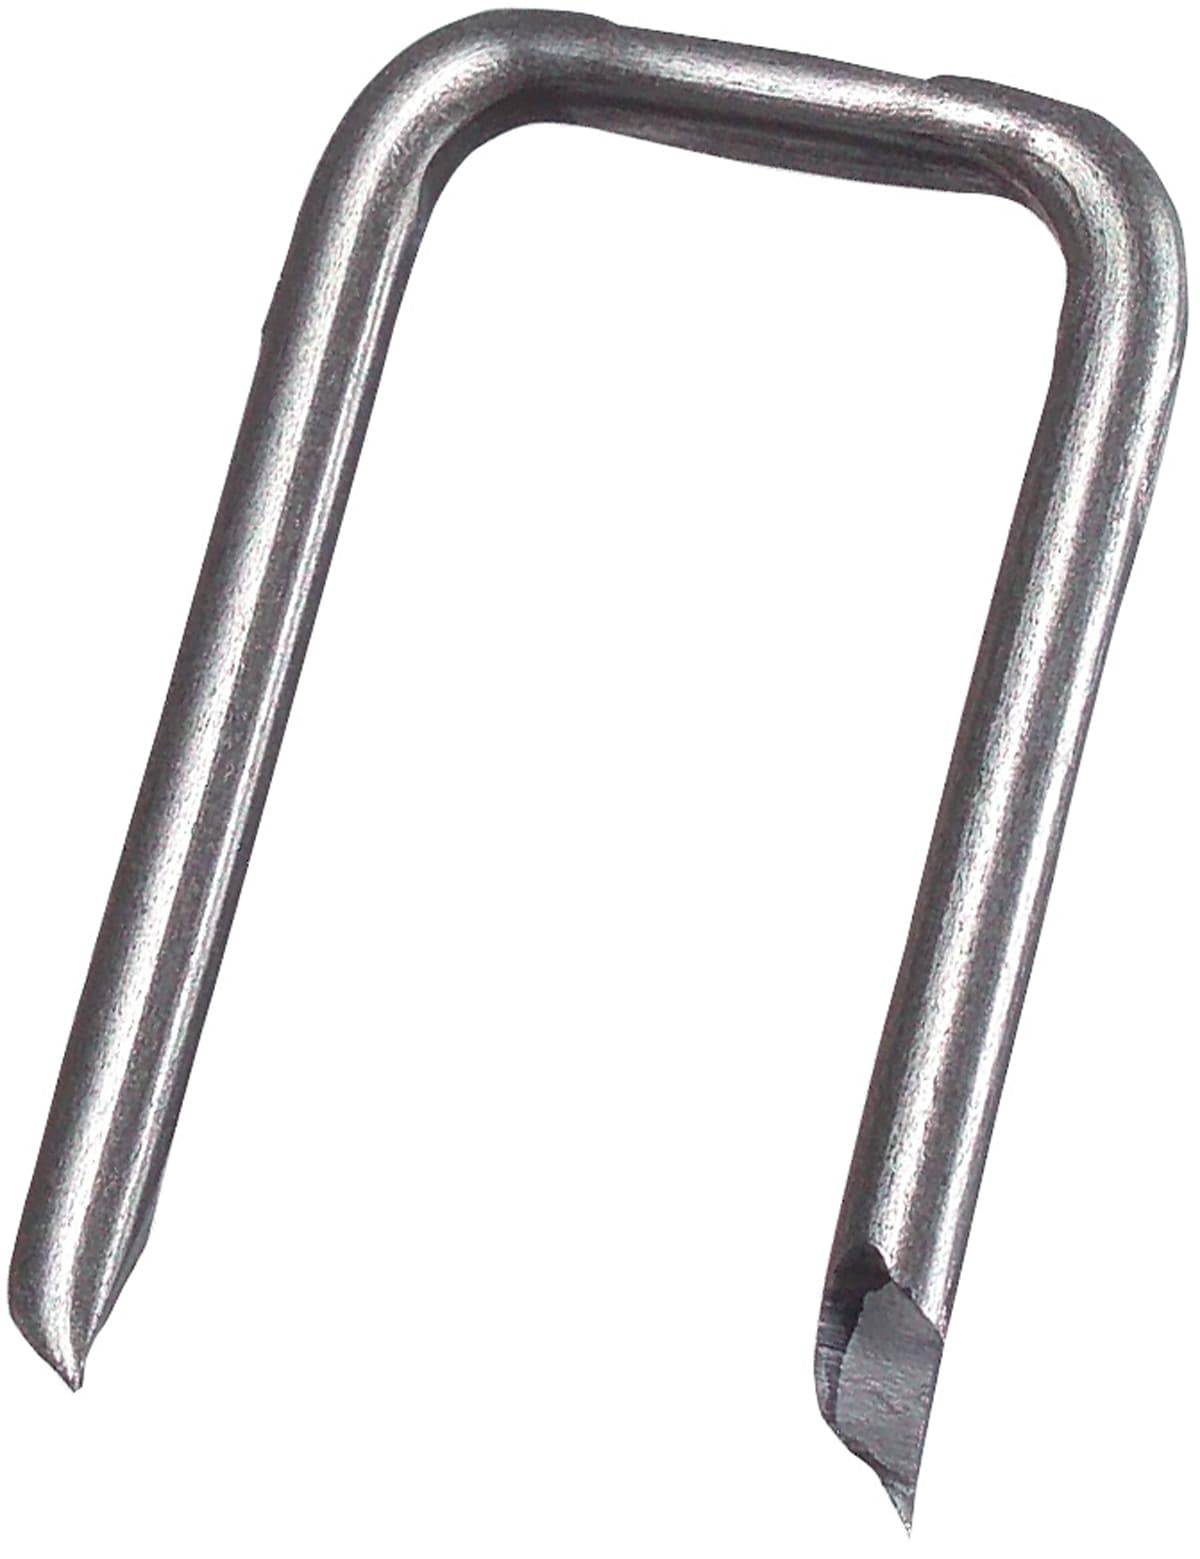 100 Pack Gardner Bender PS-150ZN Cable Staple 0.5 Zinc Plated Nail